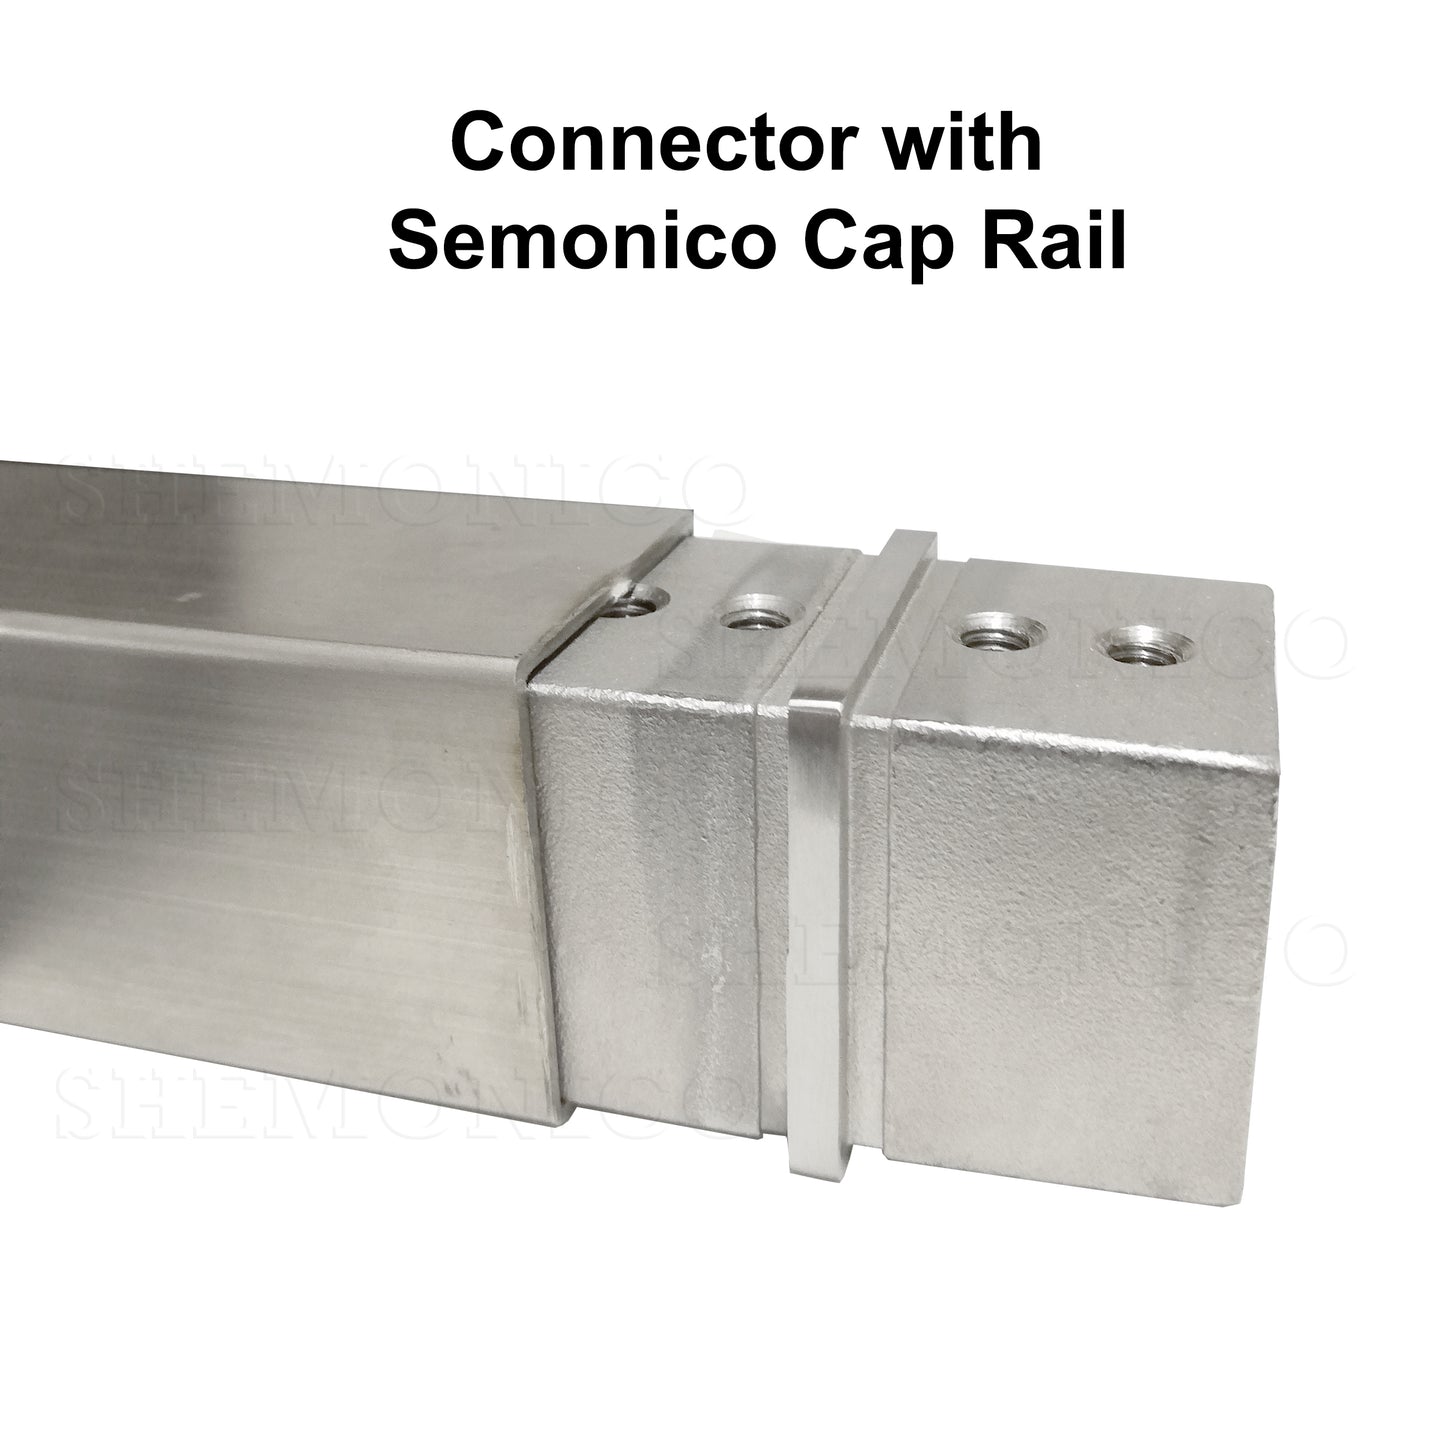 Square Connector for 1-1/2" Square Cap Railing Slot Tube Stainless Steel T316 (G1120-150-150) - SHEMONICO